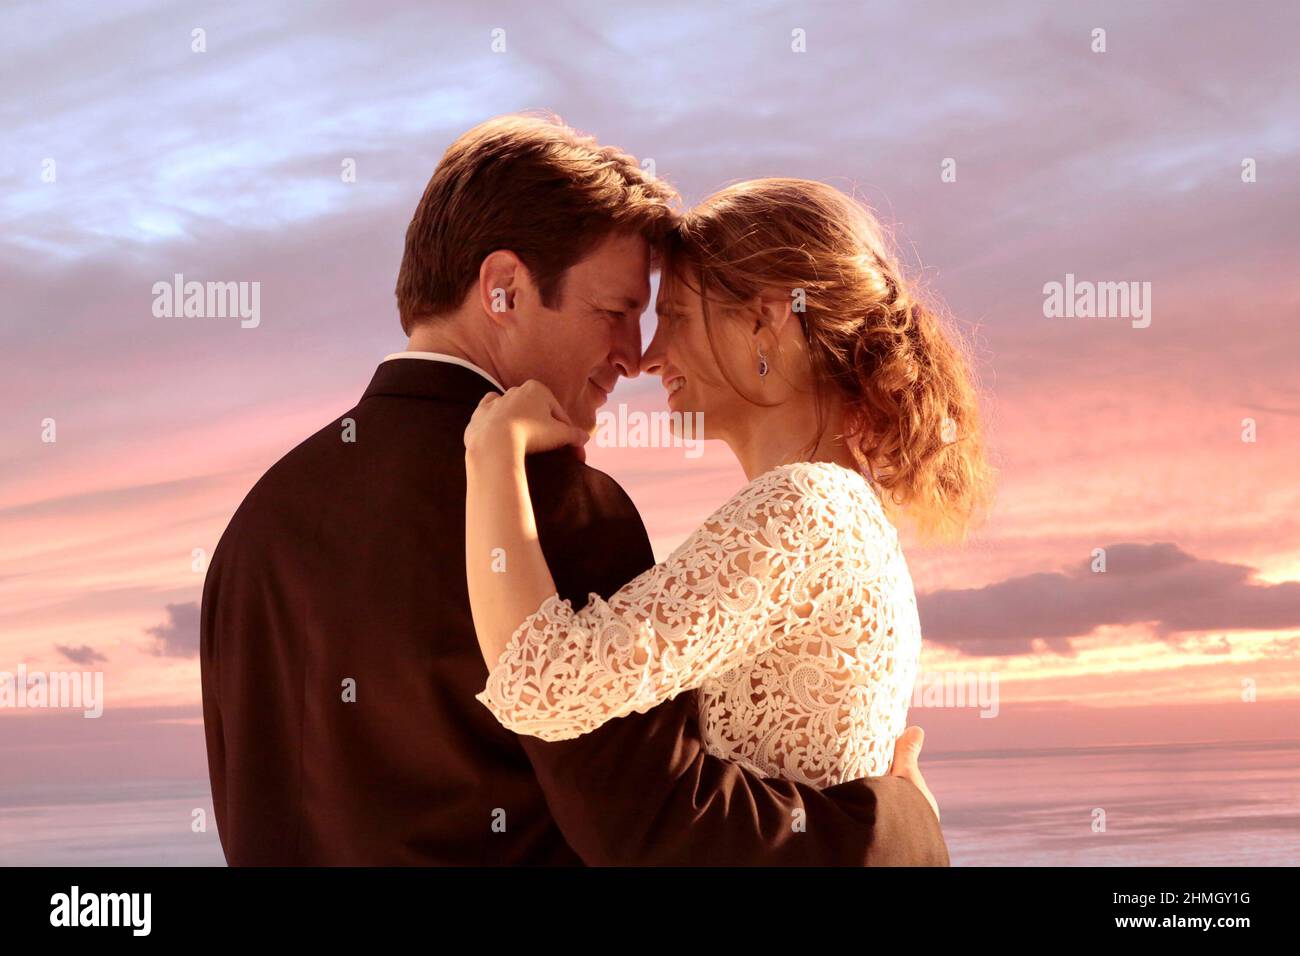 NATHAN FILLION and STANA KATIC in CASTLE (2009), directed by ROB BOWMAN and BRYAN SPICER. Credit: Beacon Pictures / Album Stock Photo